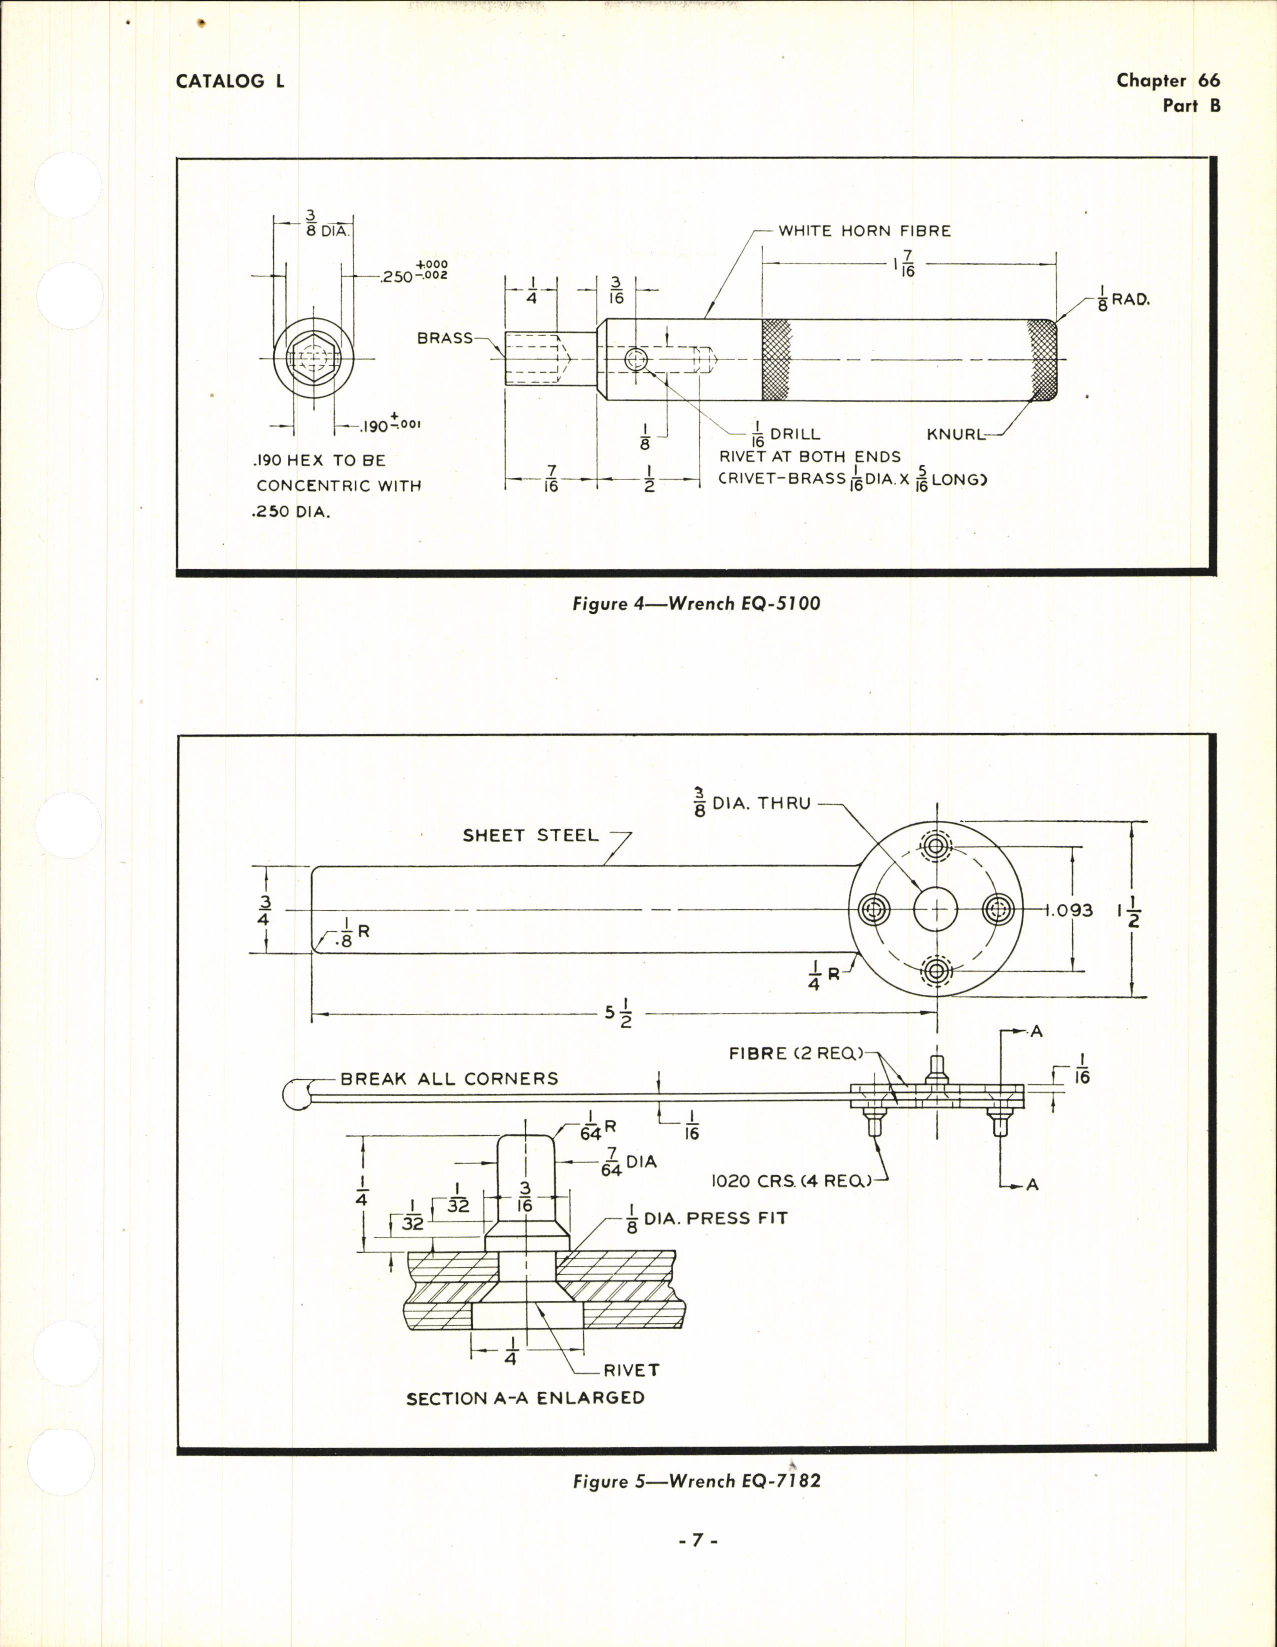 Sample page 7 from AirCorps Library document: Overhaul Instructions for D-C Carbon Pile Voltage Regulator Control Panel Type 1202 Model 1